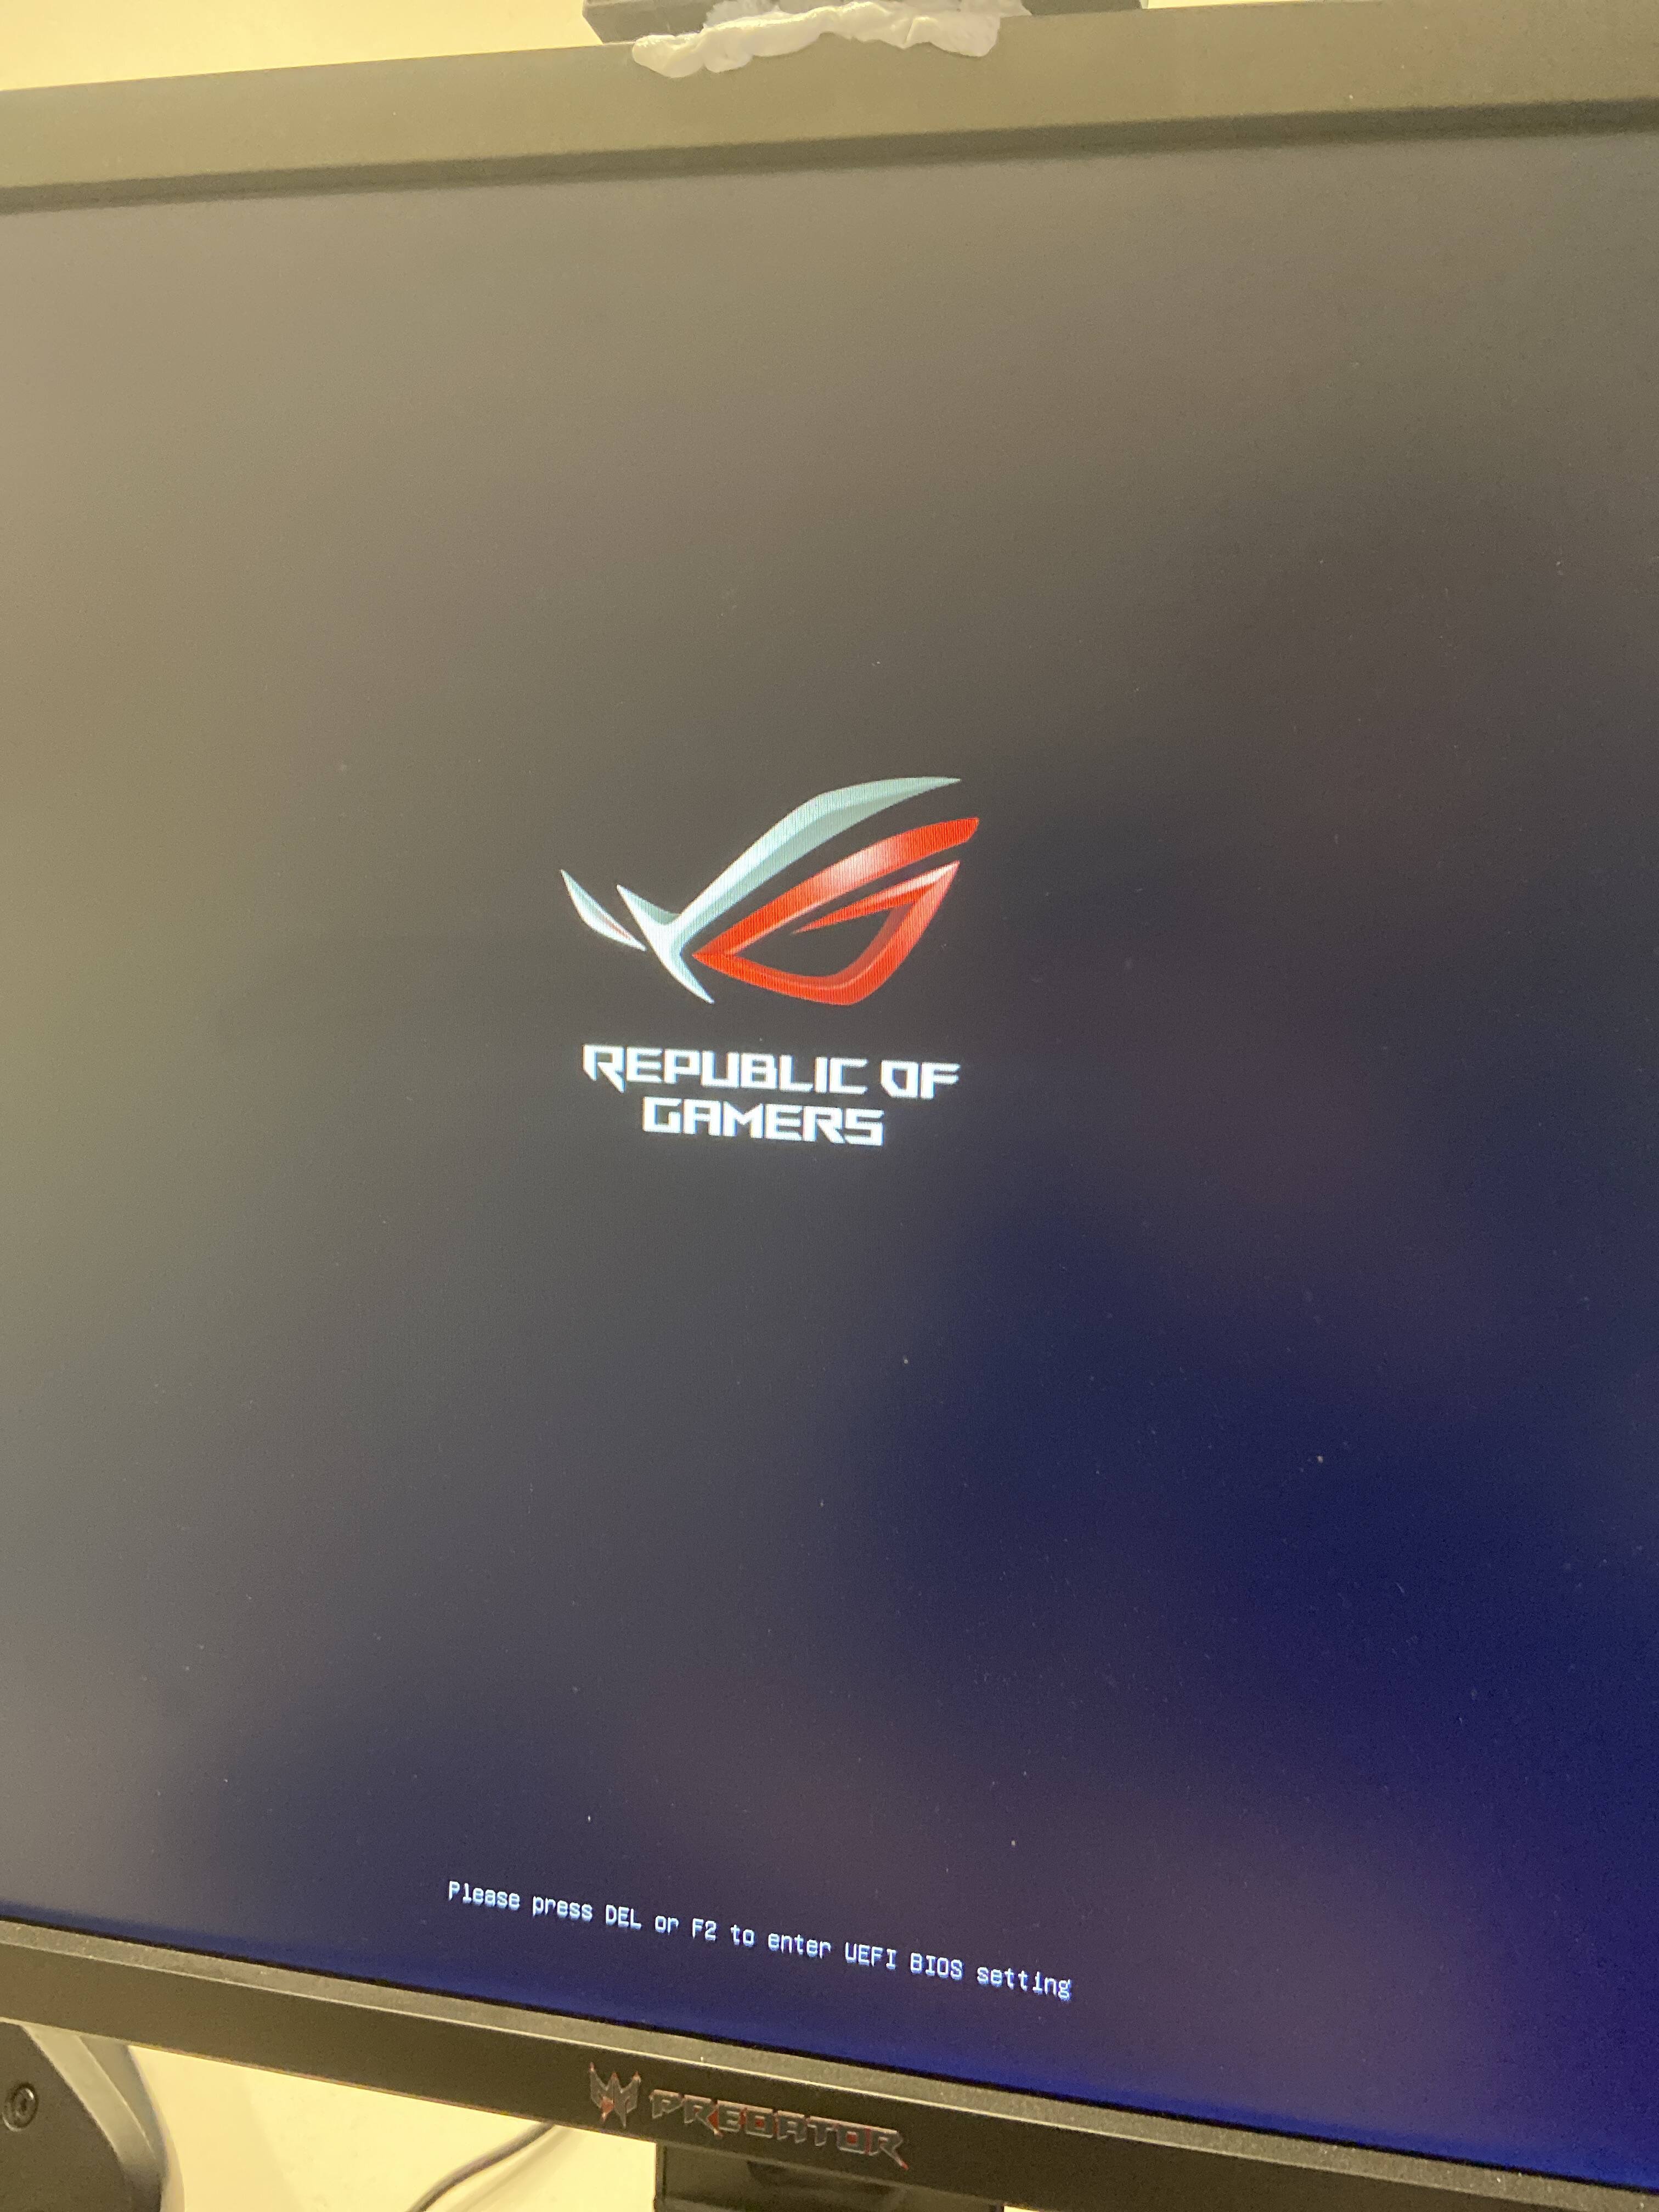 Pc stuck at republic of gamers logo and cannot boot to bios - CPUs